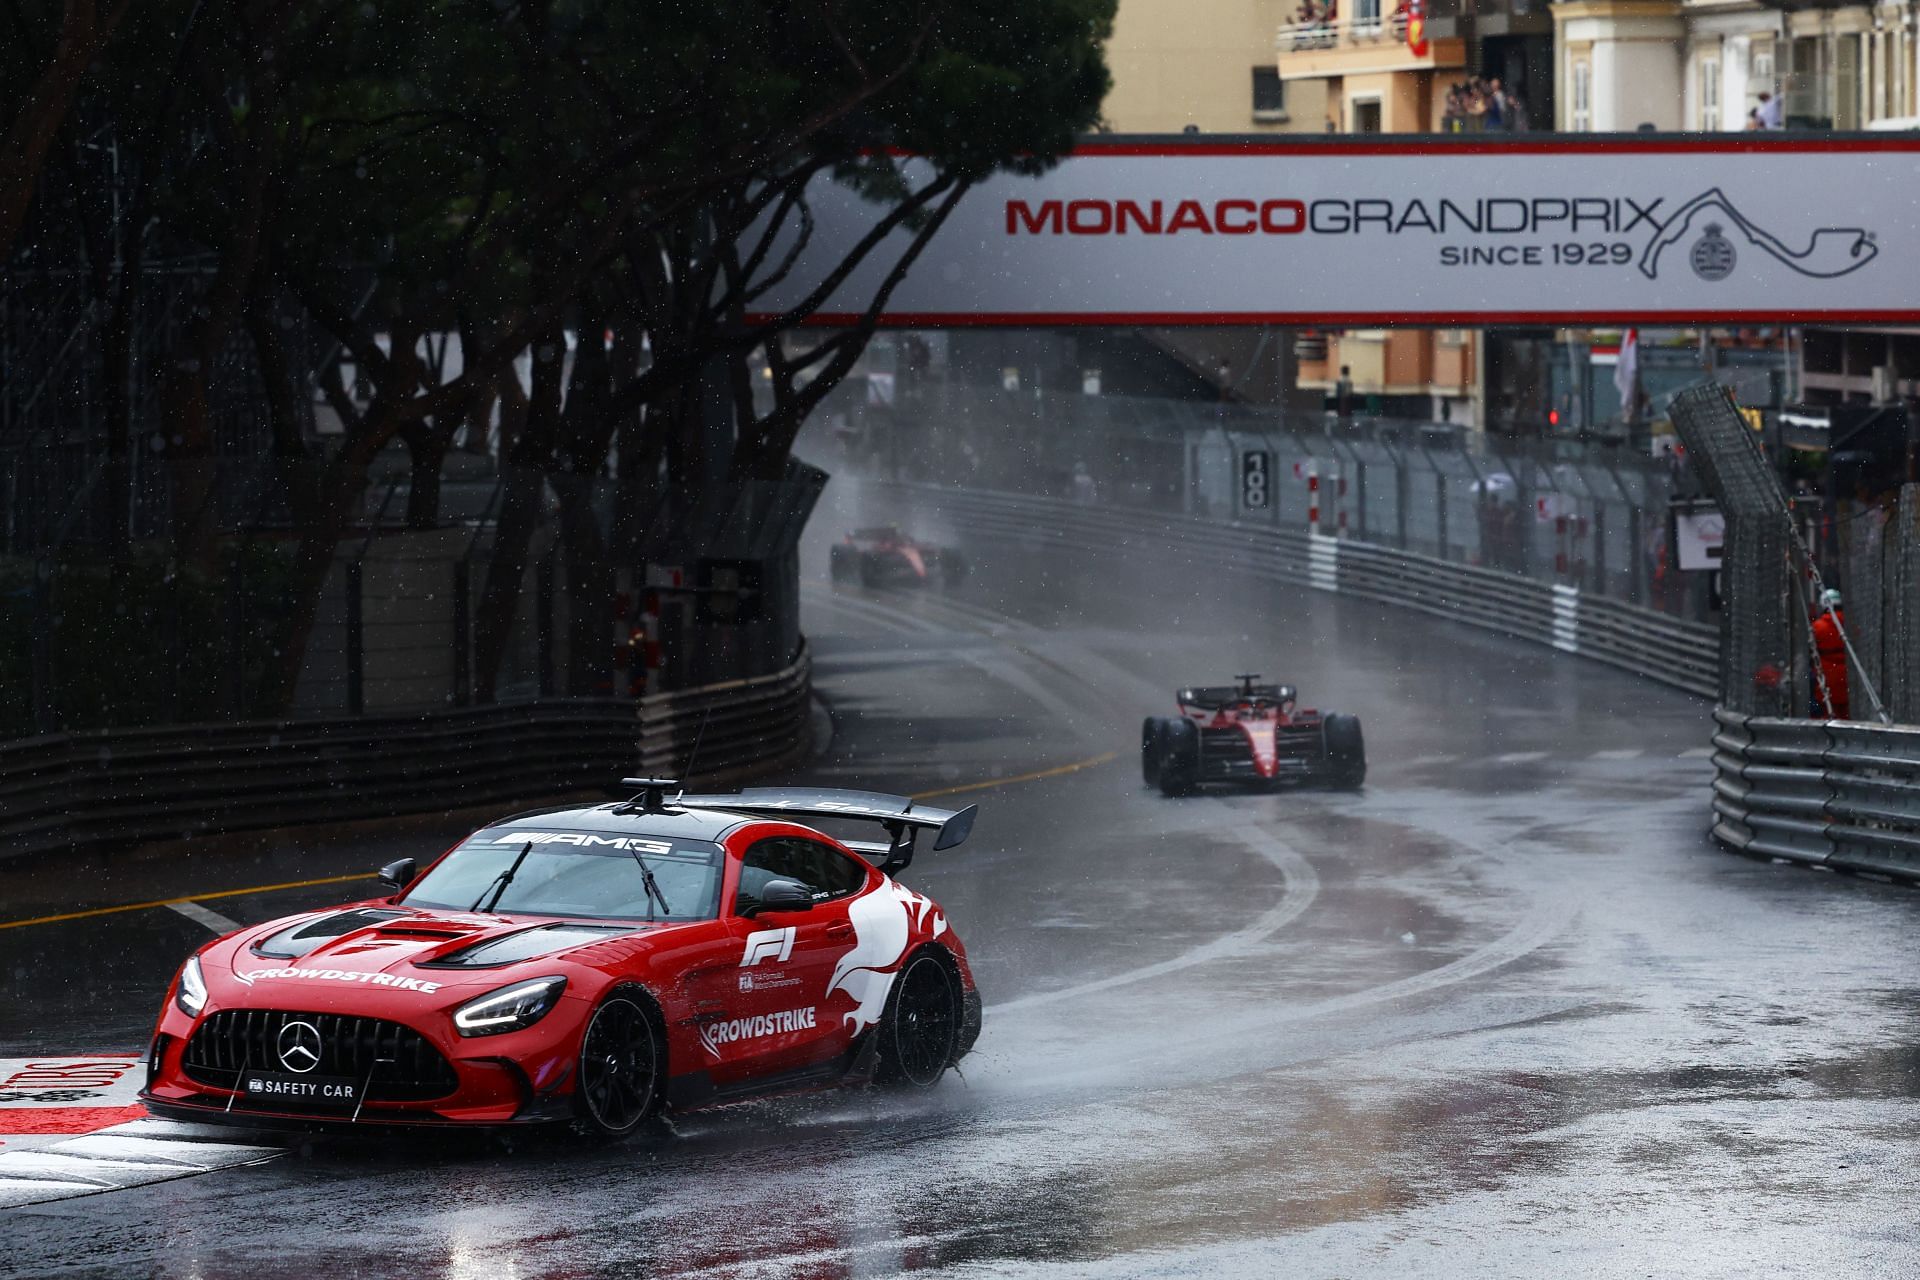 The FIA Safety Car leads the field on the formation lap during the F1 Grand Prix of Monaco in 2022 (Photo by Mark Thompson/Getty Images)